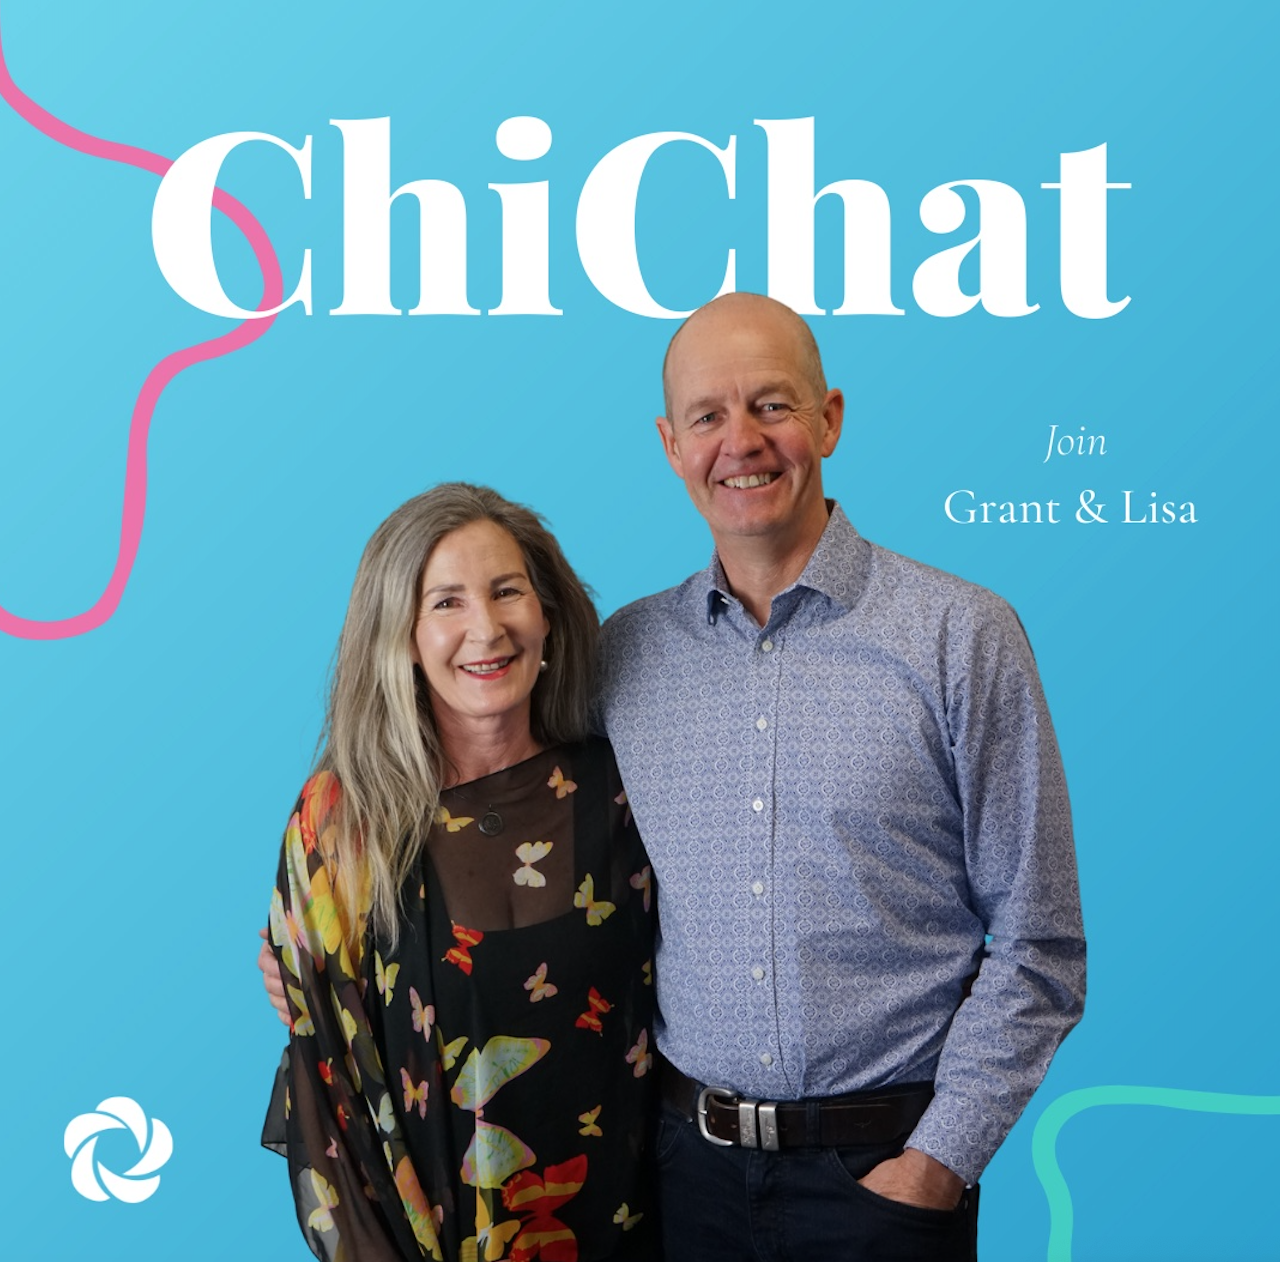 How ChiChart can help you have better relationships